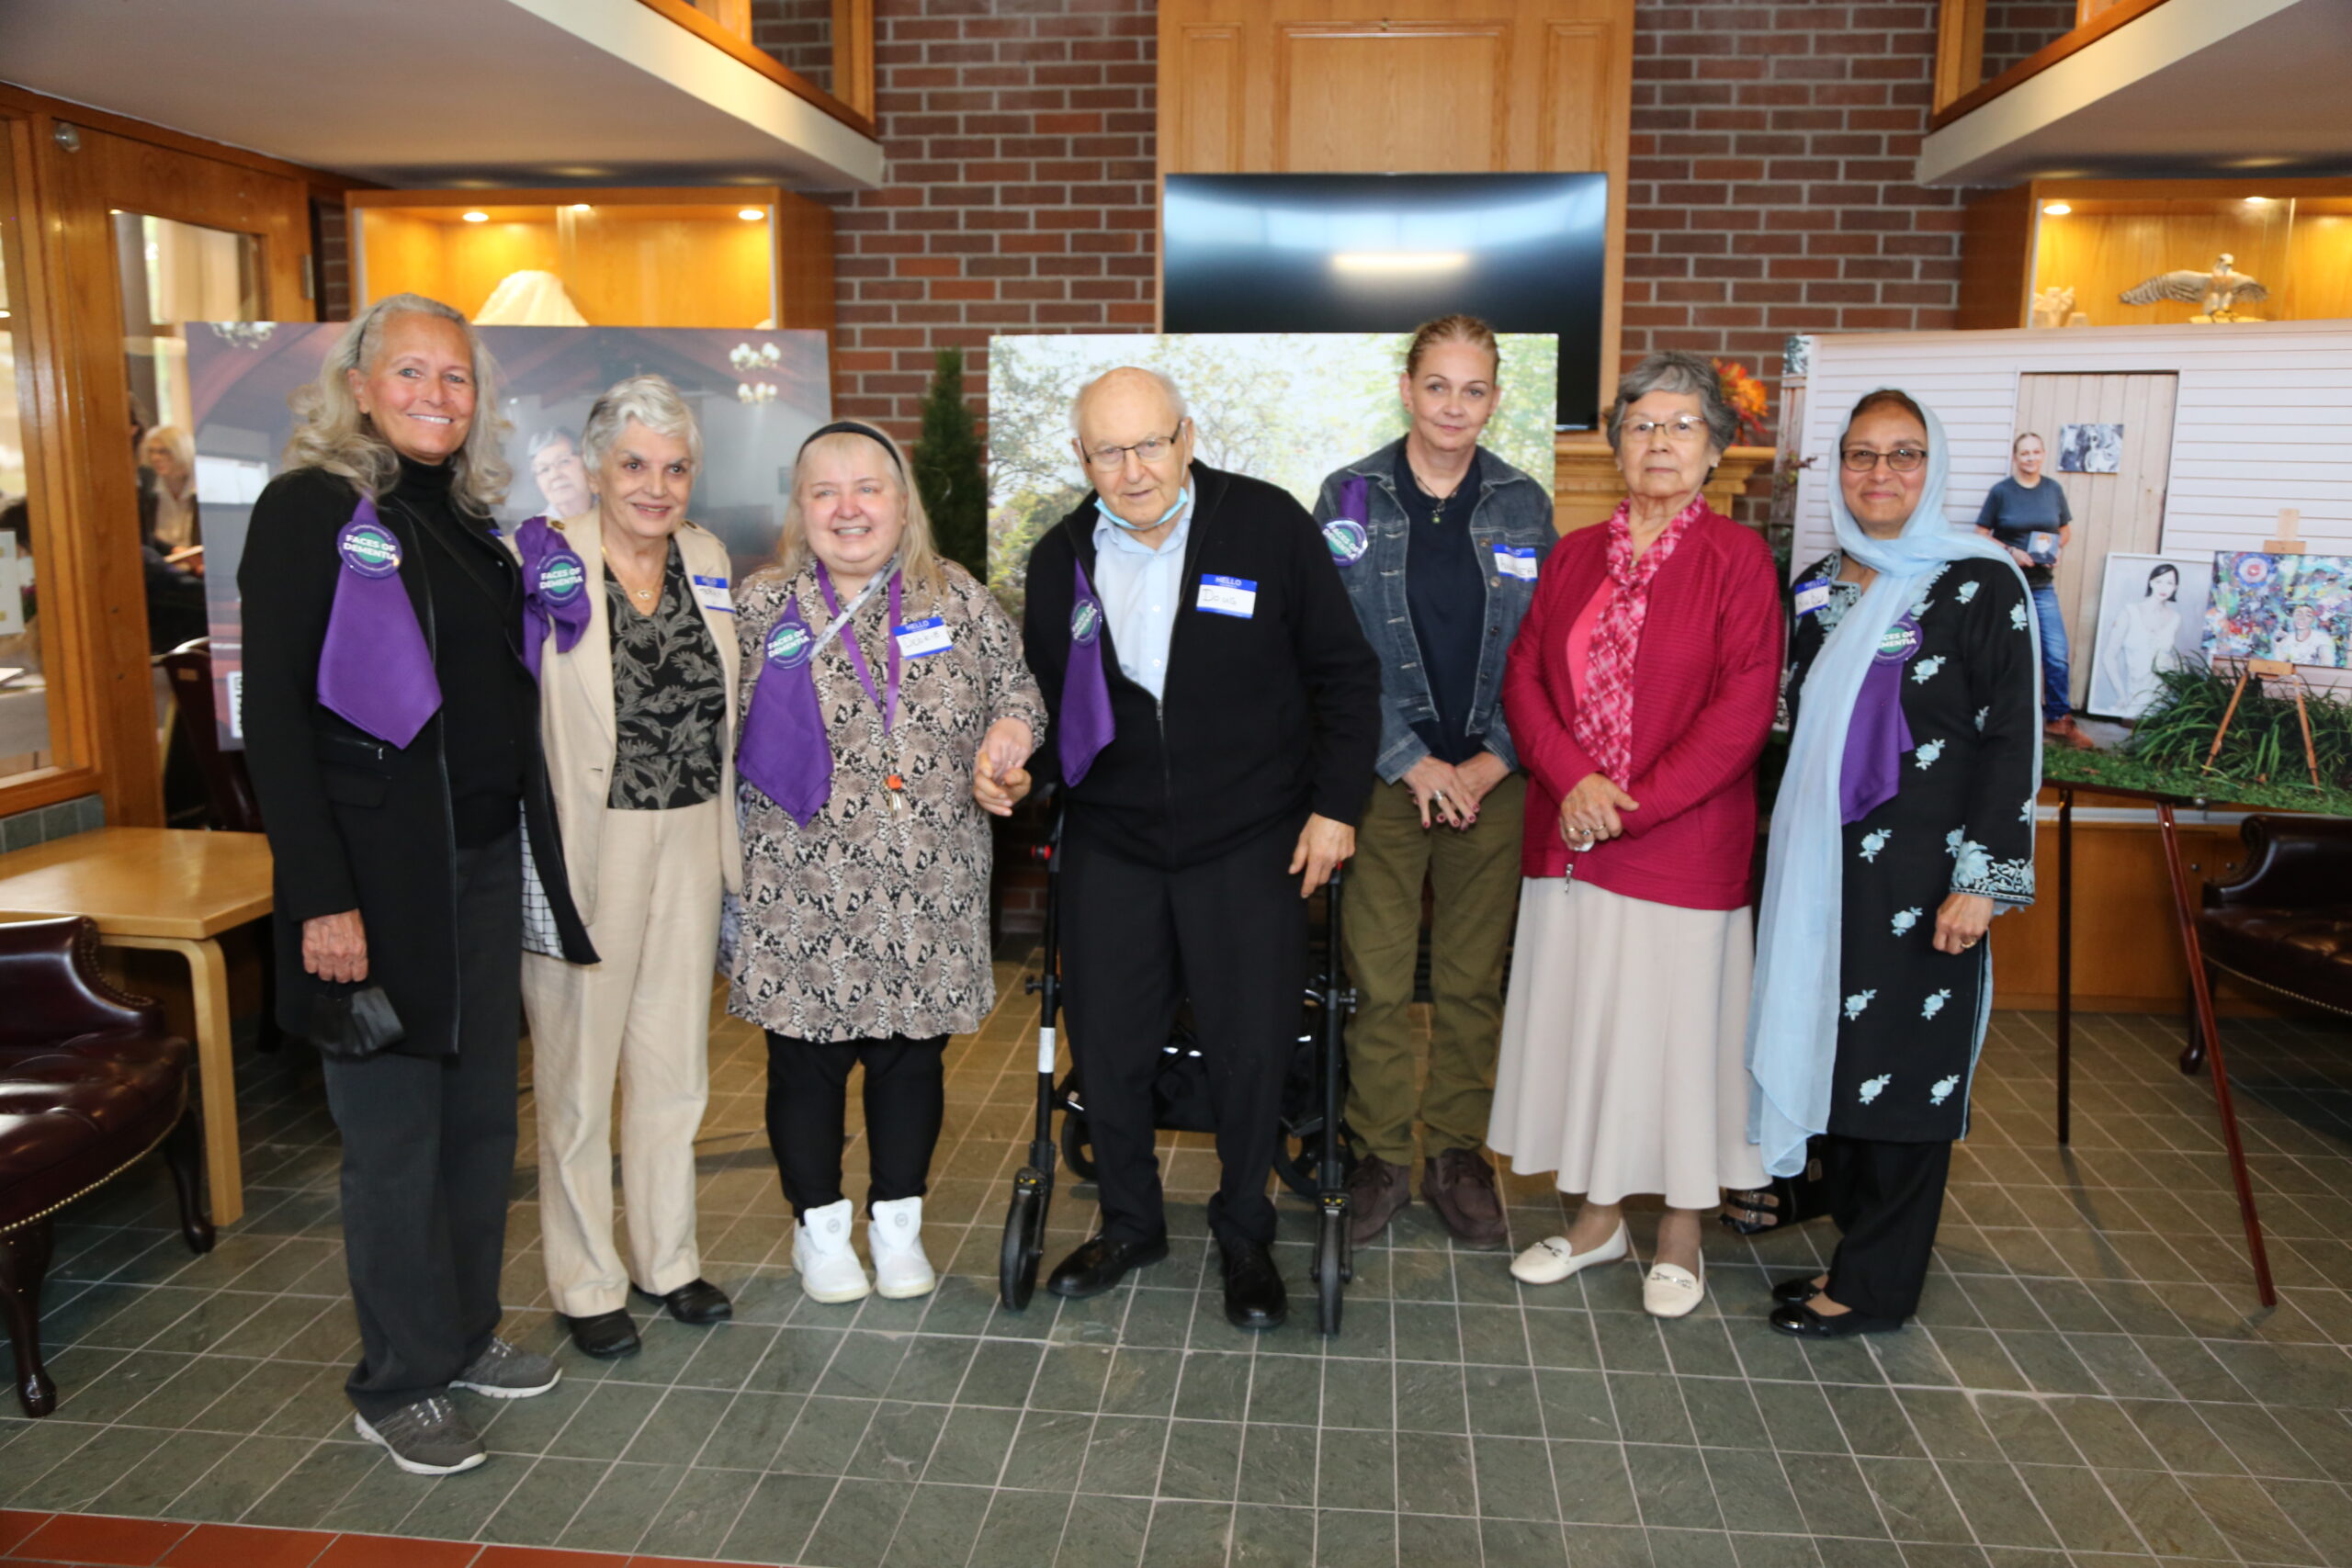 The dementia-friendly communities participants standing together smiling